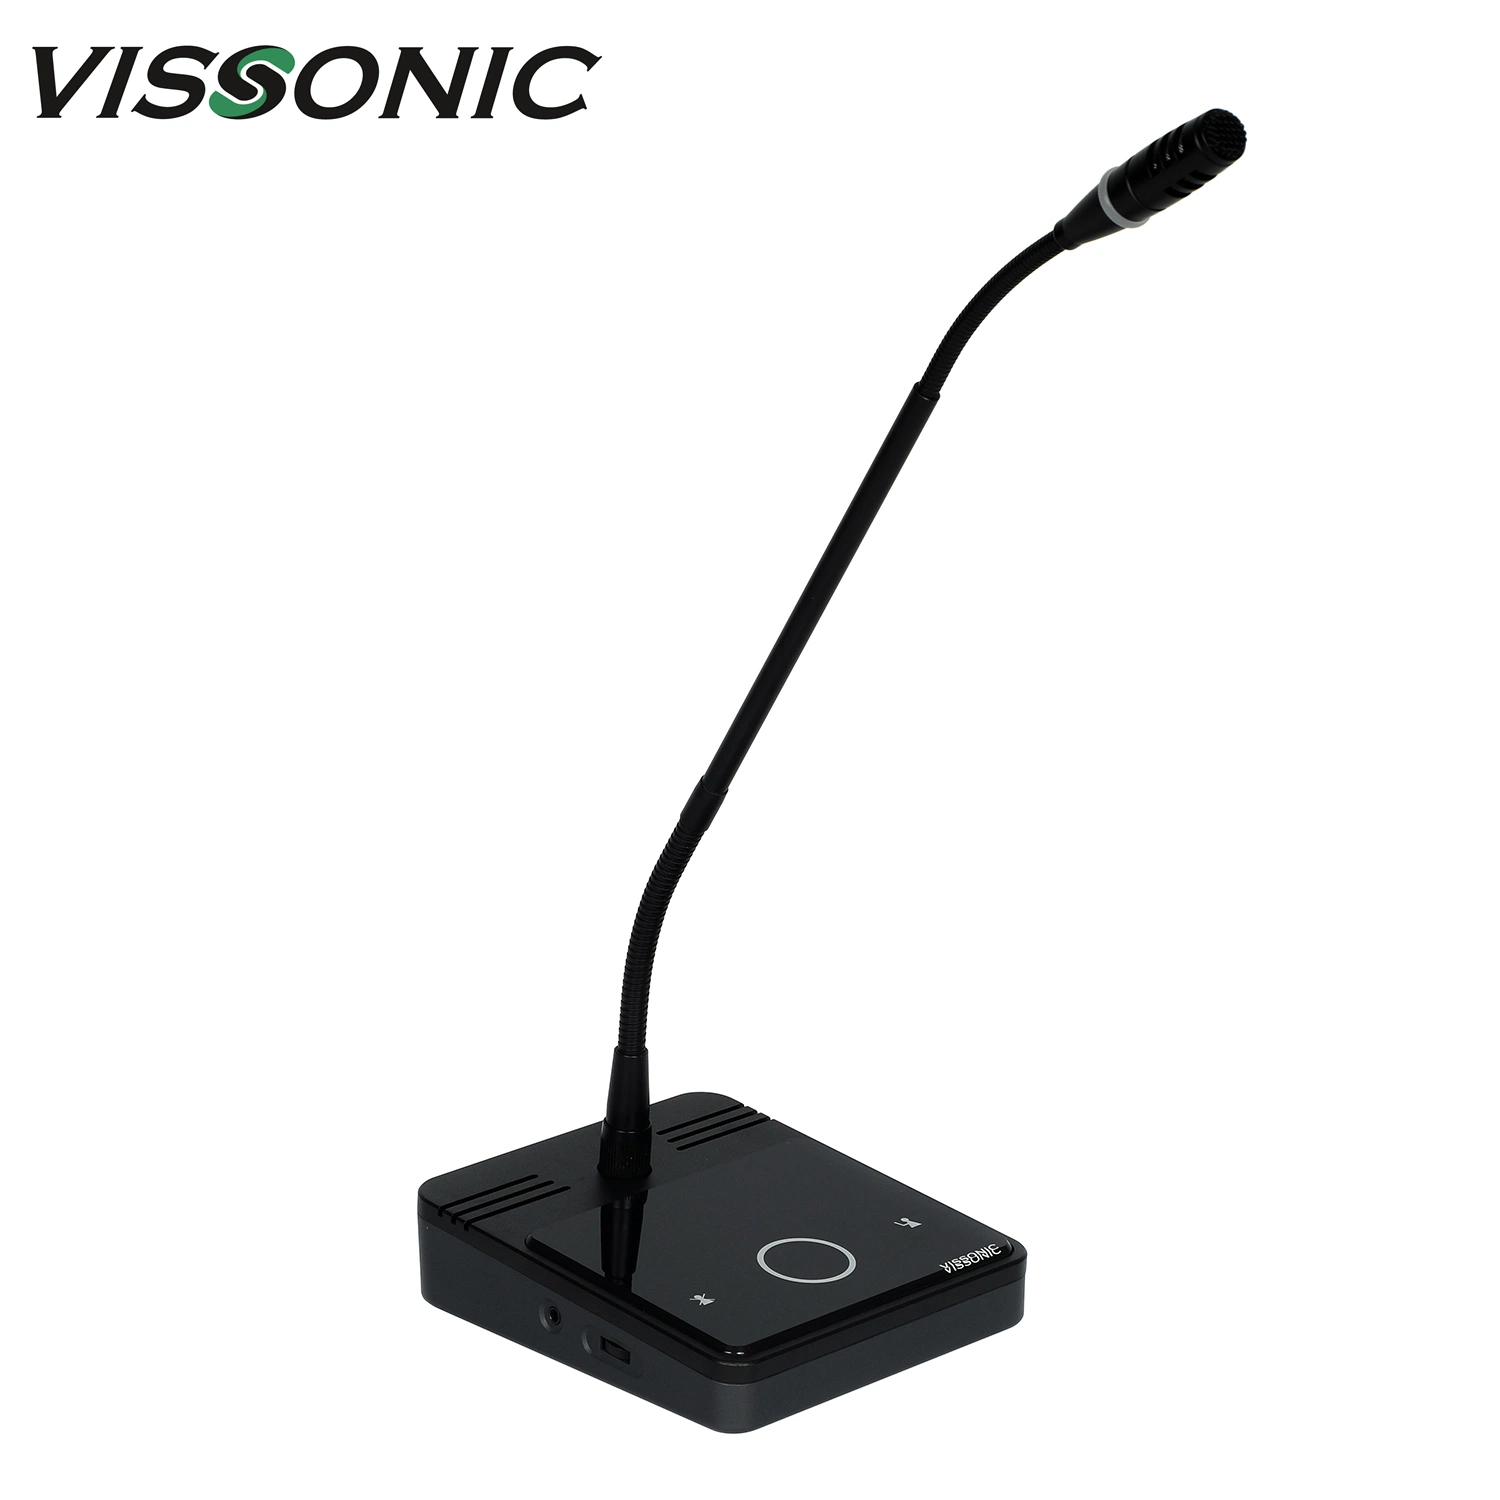 Vissonic Digital Conference System Audio Wired Conference System Microphone